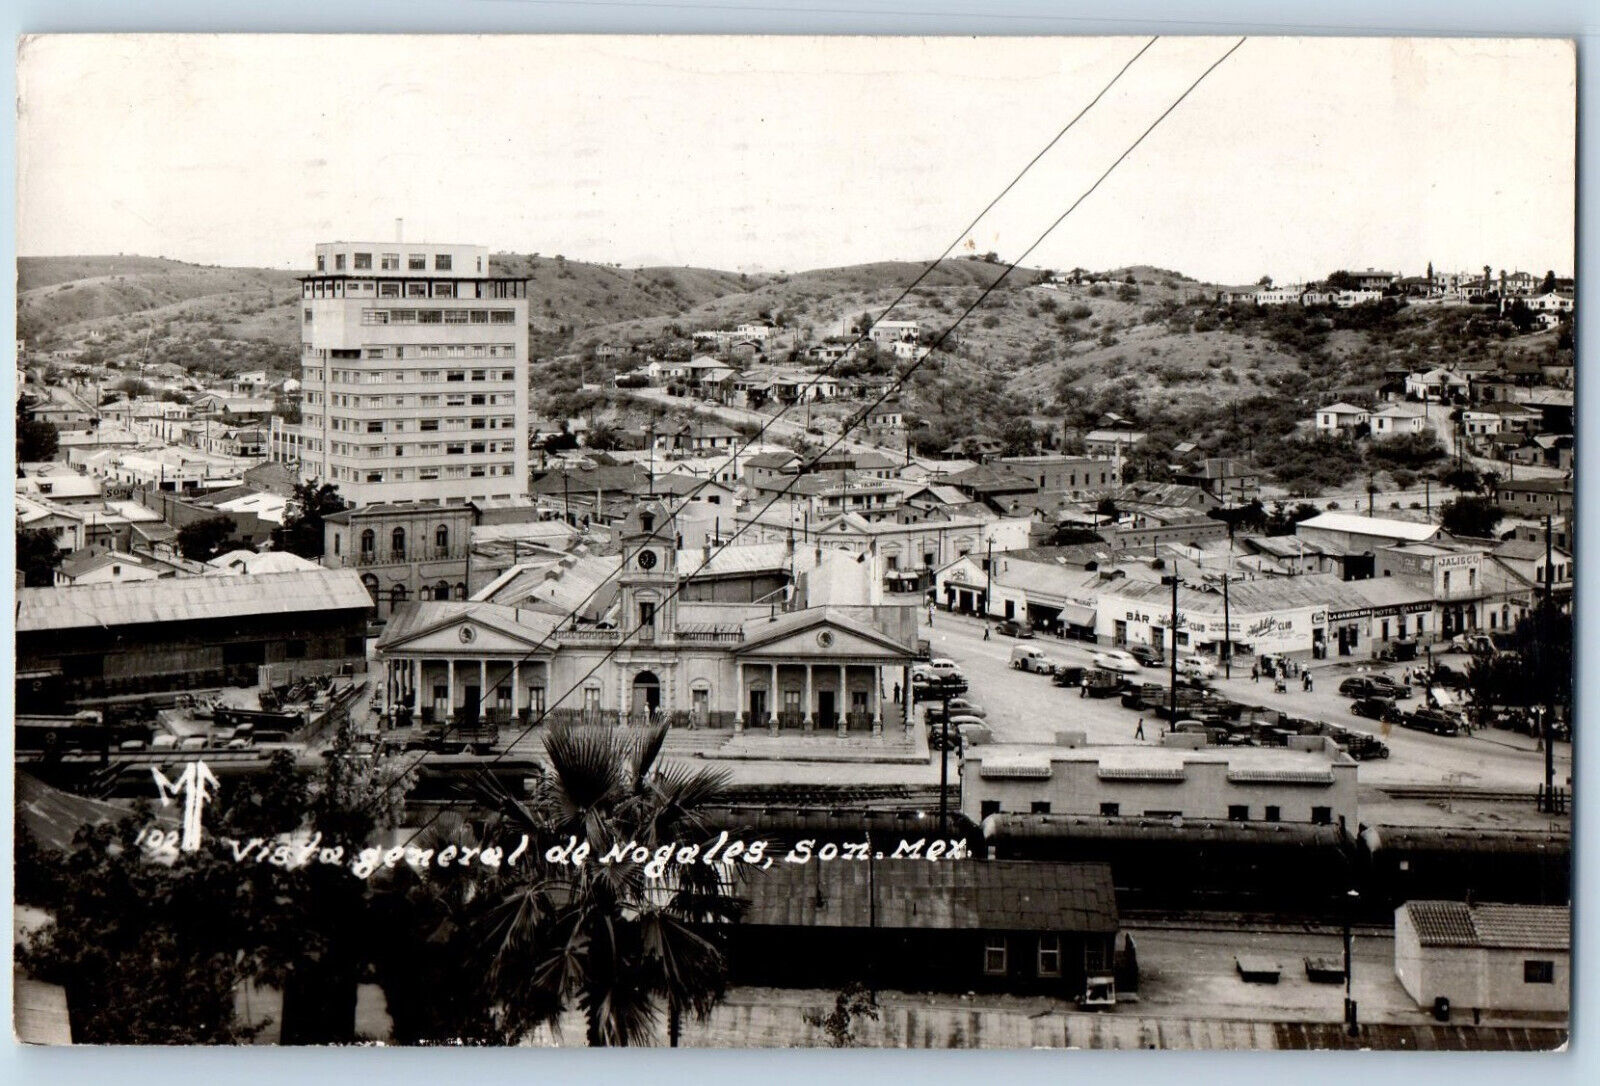 Nogales Sonora Mexico Postcard General View 1952 Vintage Posted RPPC Photo